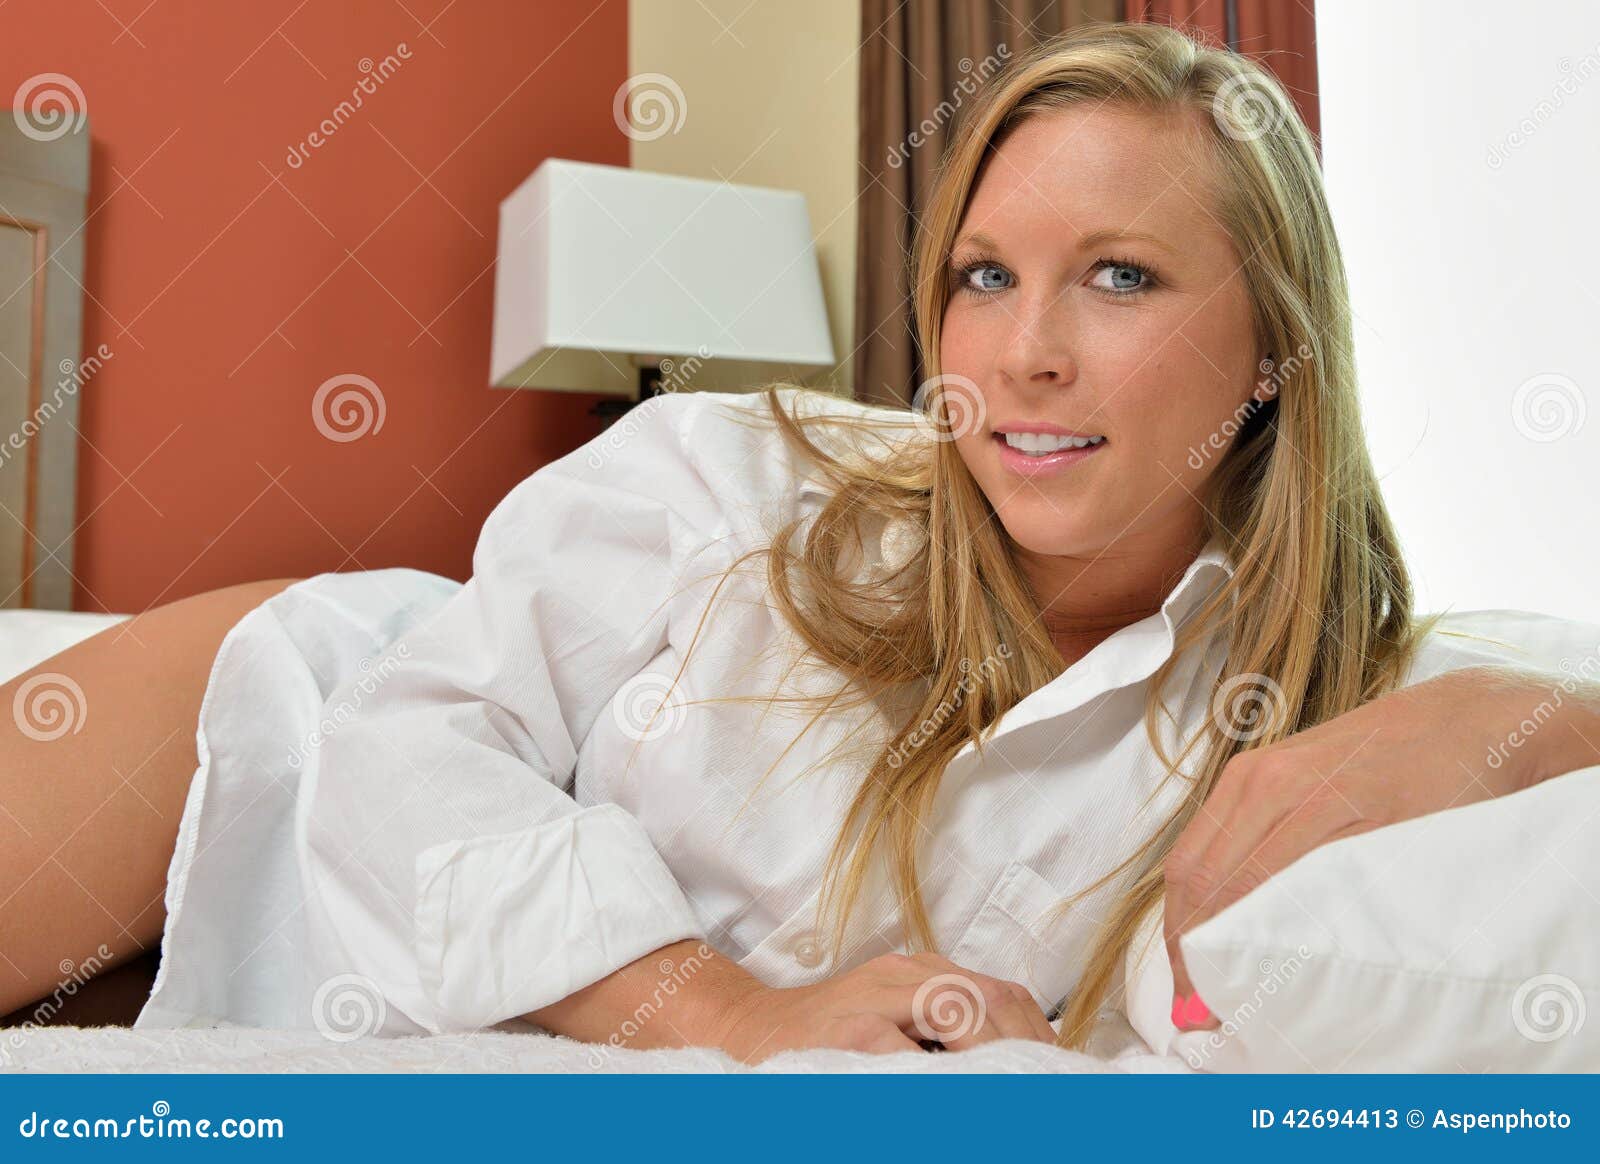 Blonde Woman Wearing Only Mens Shirt Bedroom Stock Image Image 42694413 